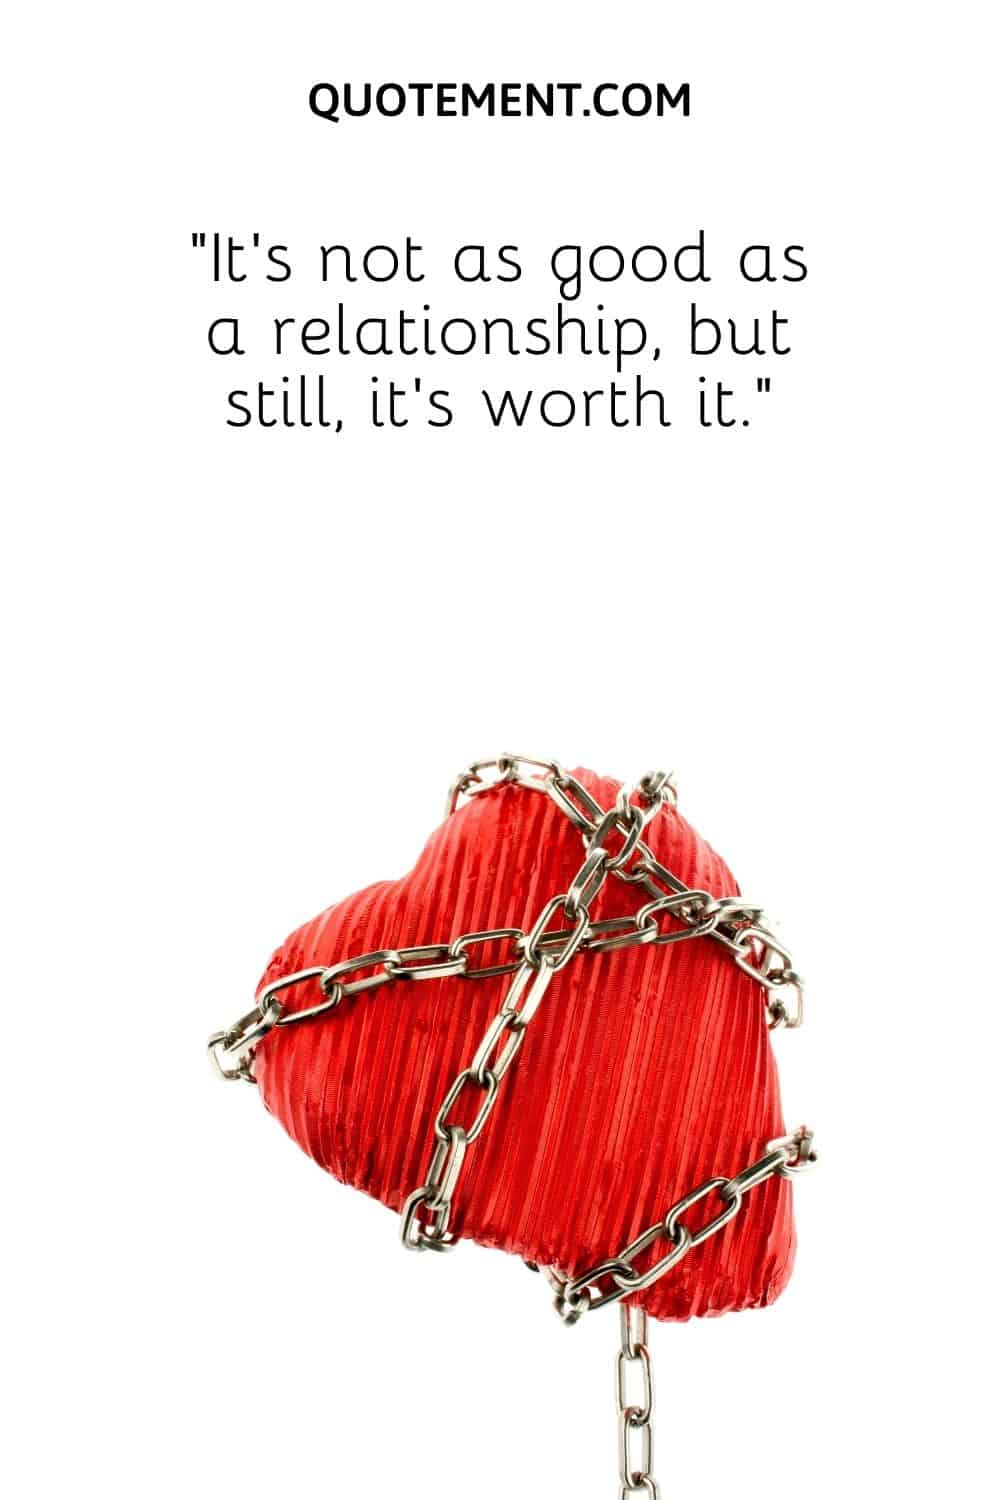 “It’s not as good as a relationship, but still, it’s worth it.”